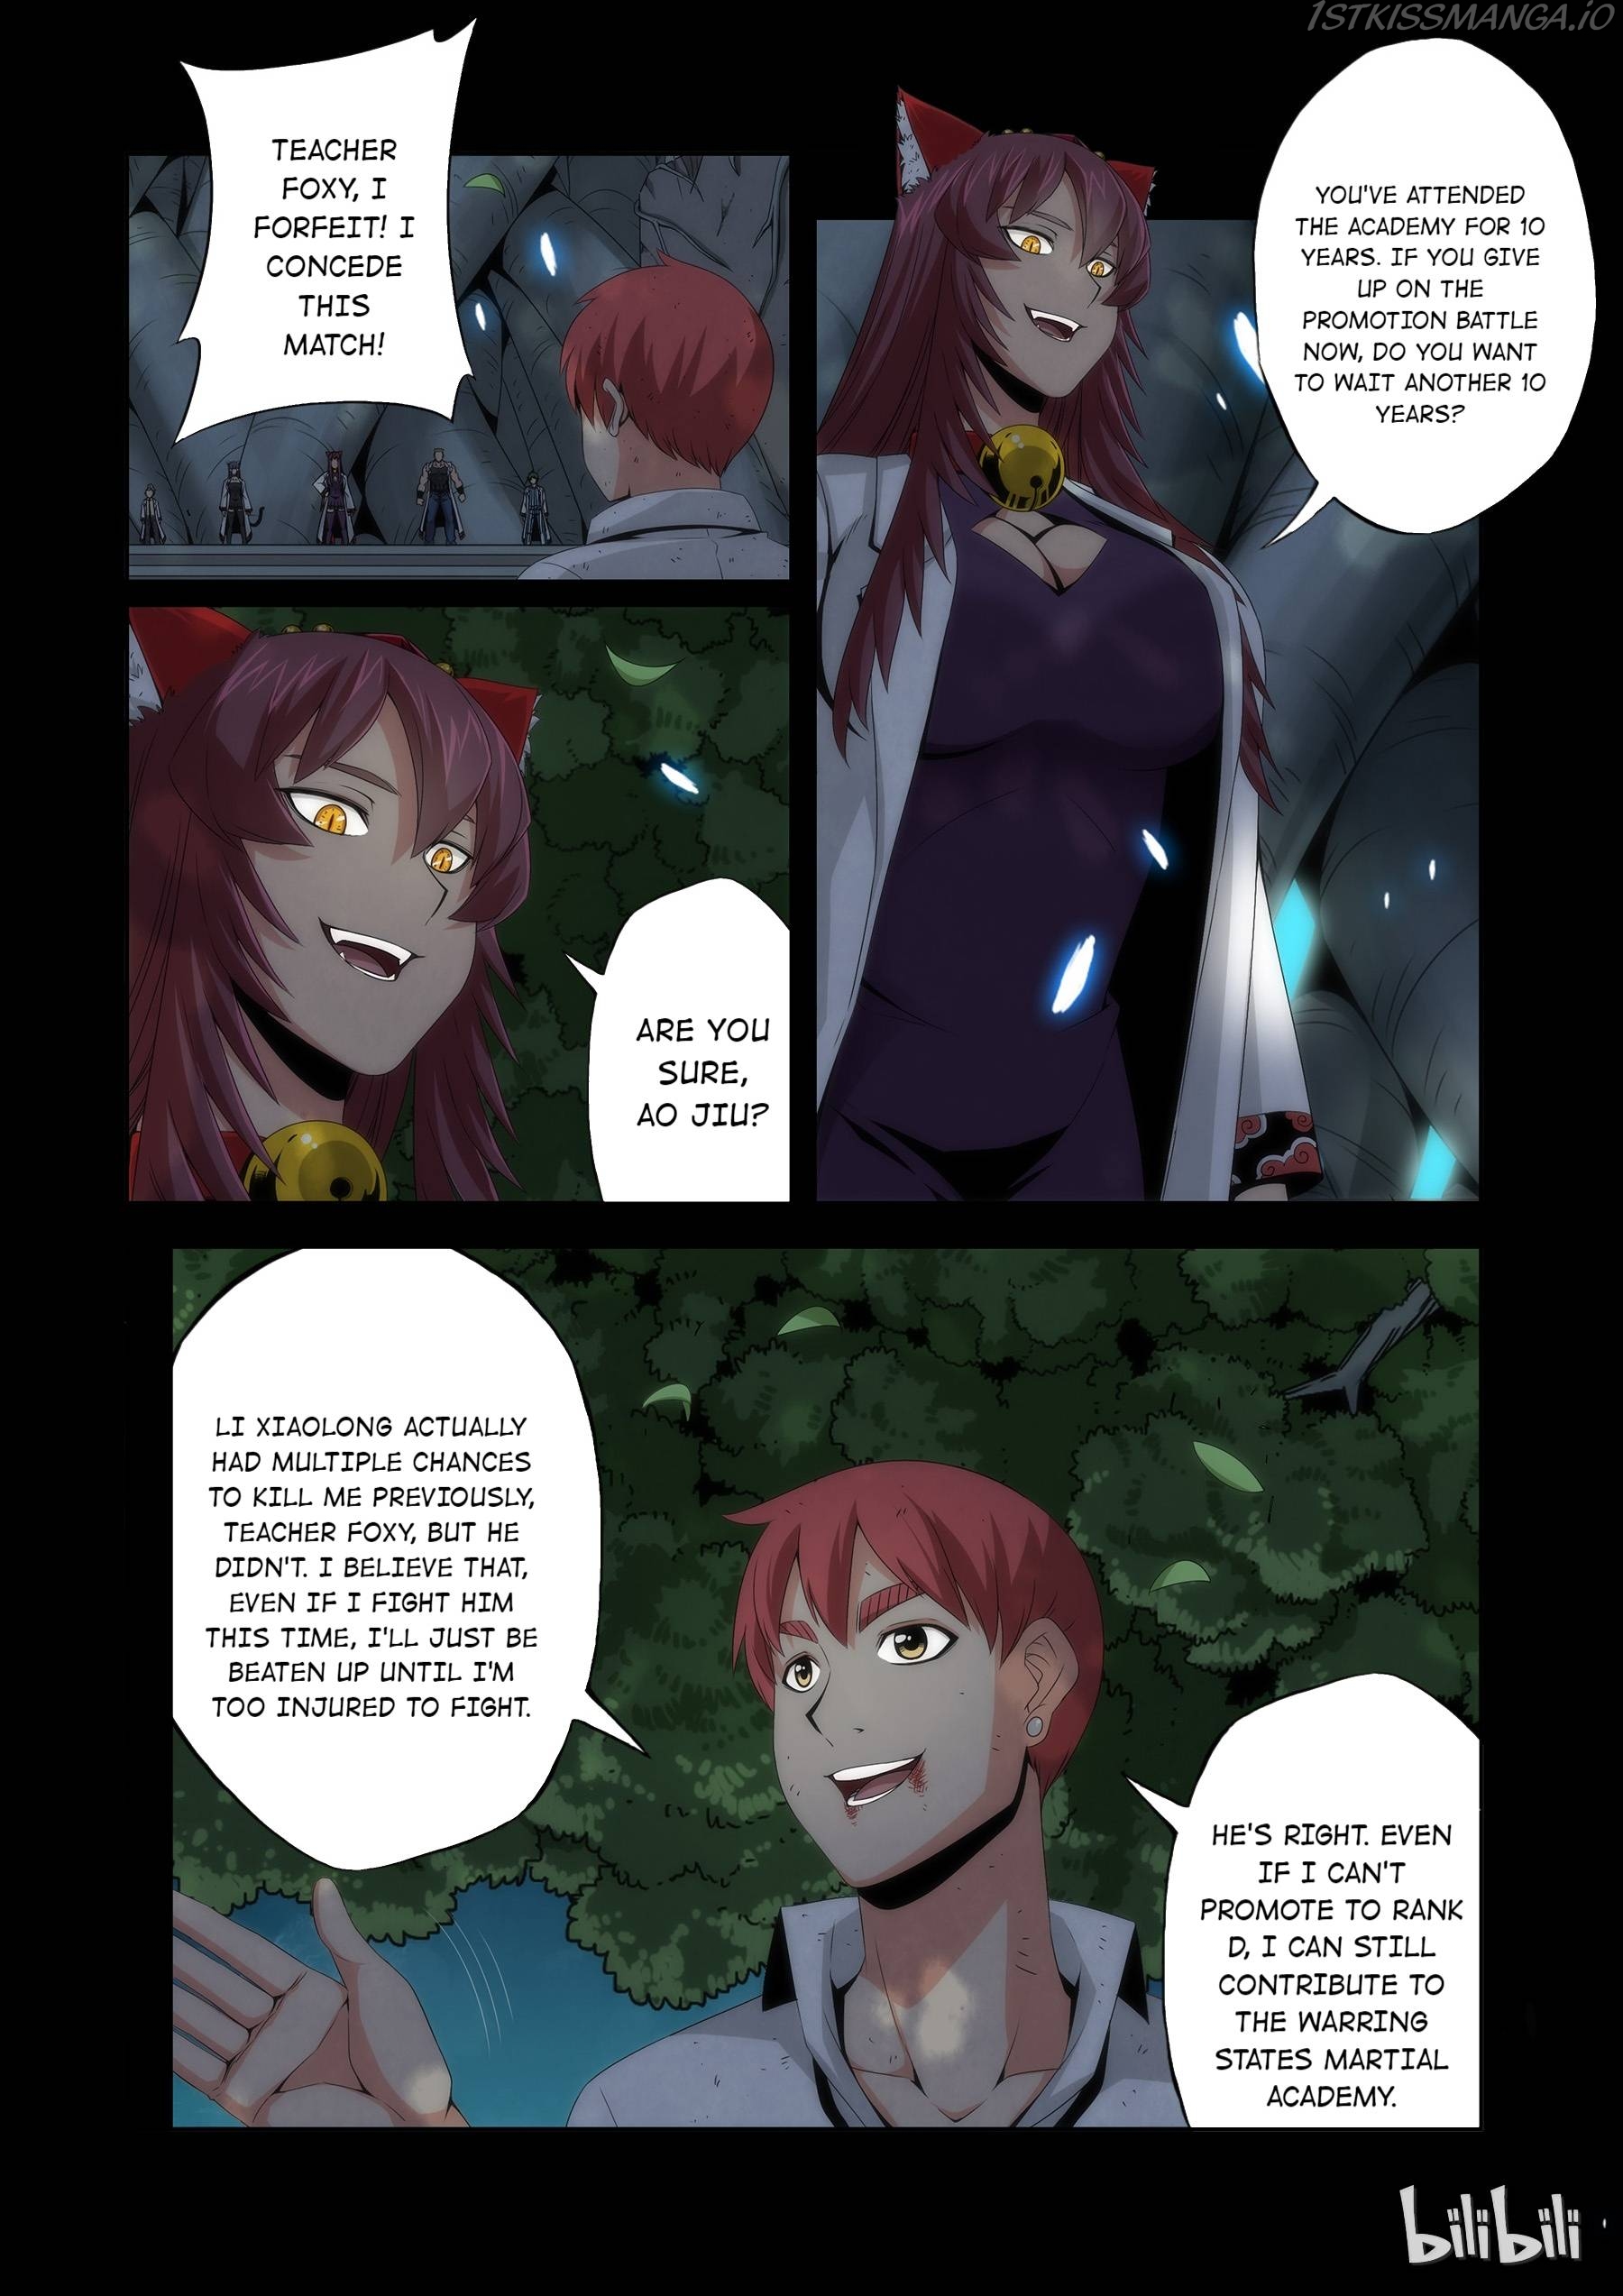 Warring States Martial Academy Chapter 66 - Page 1